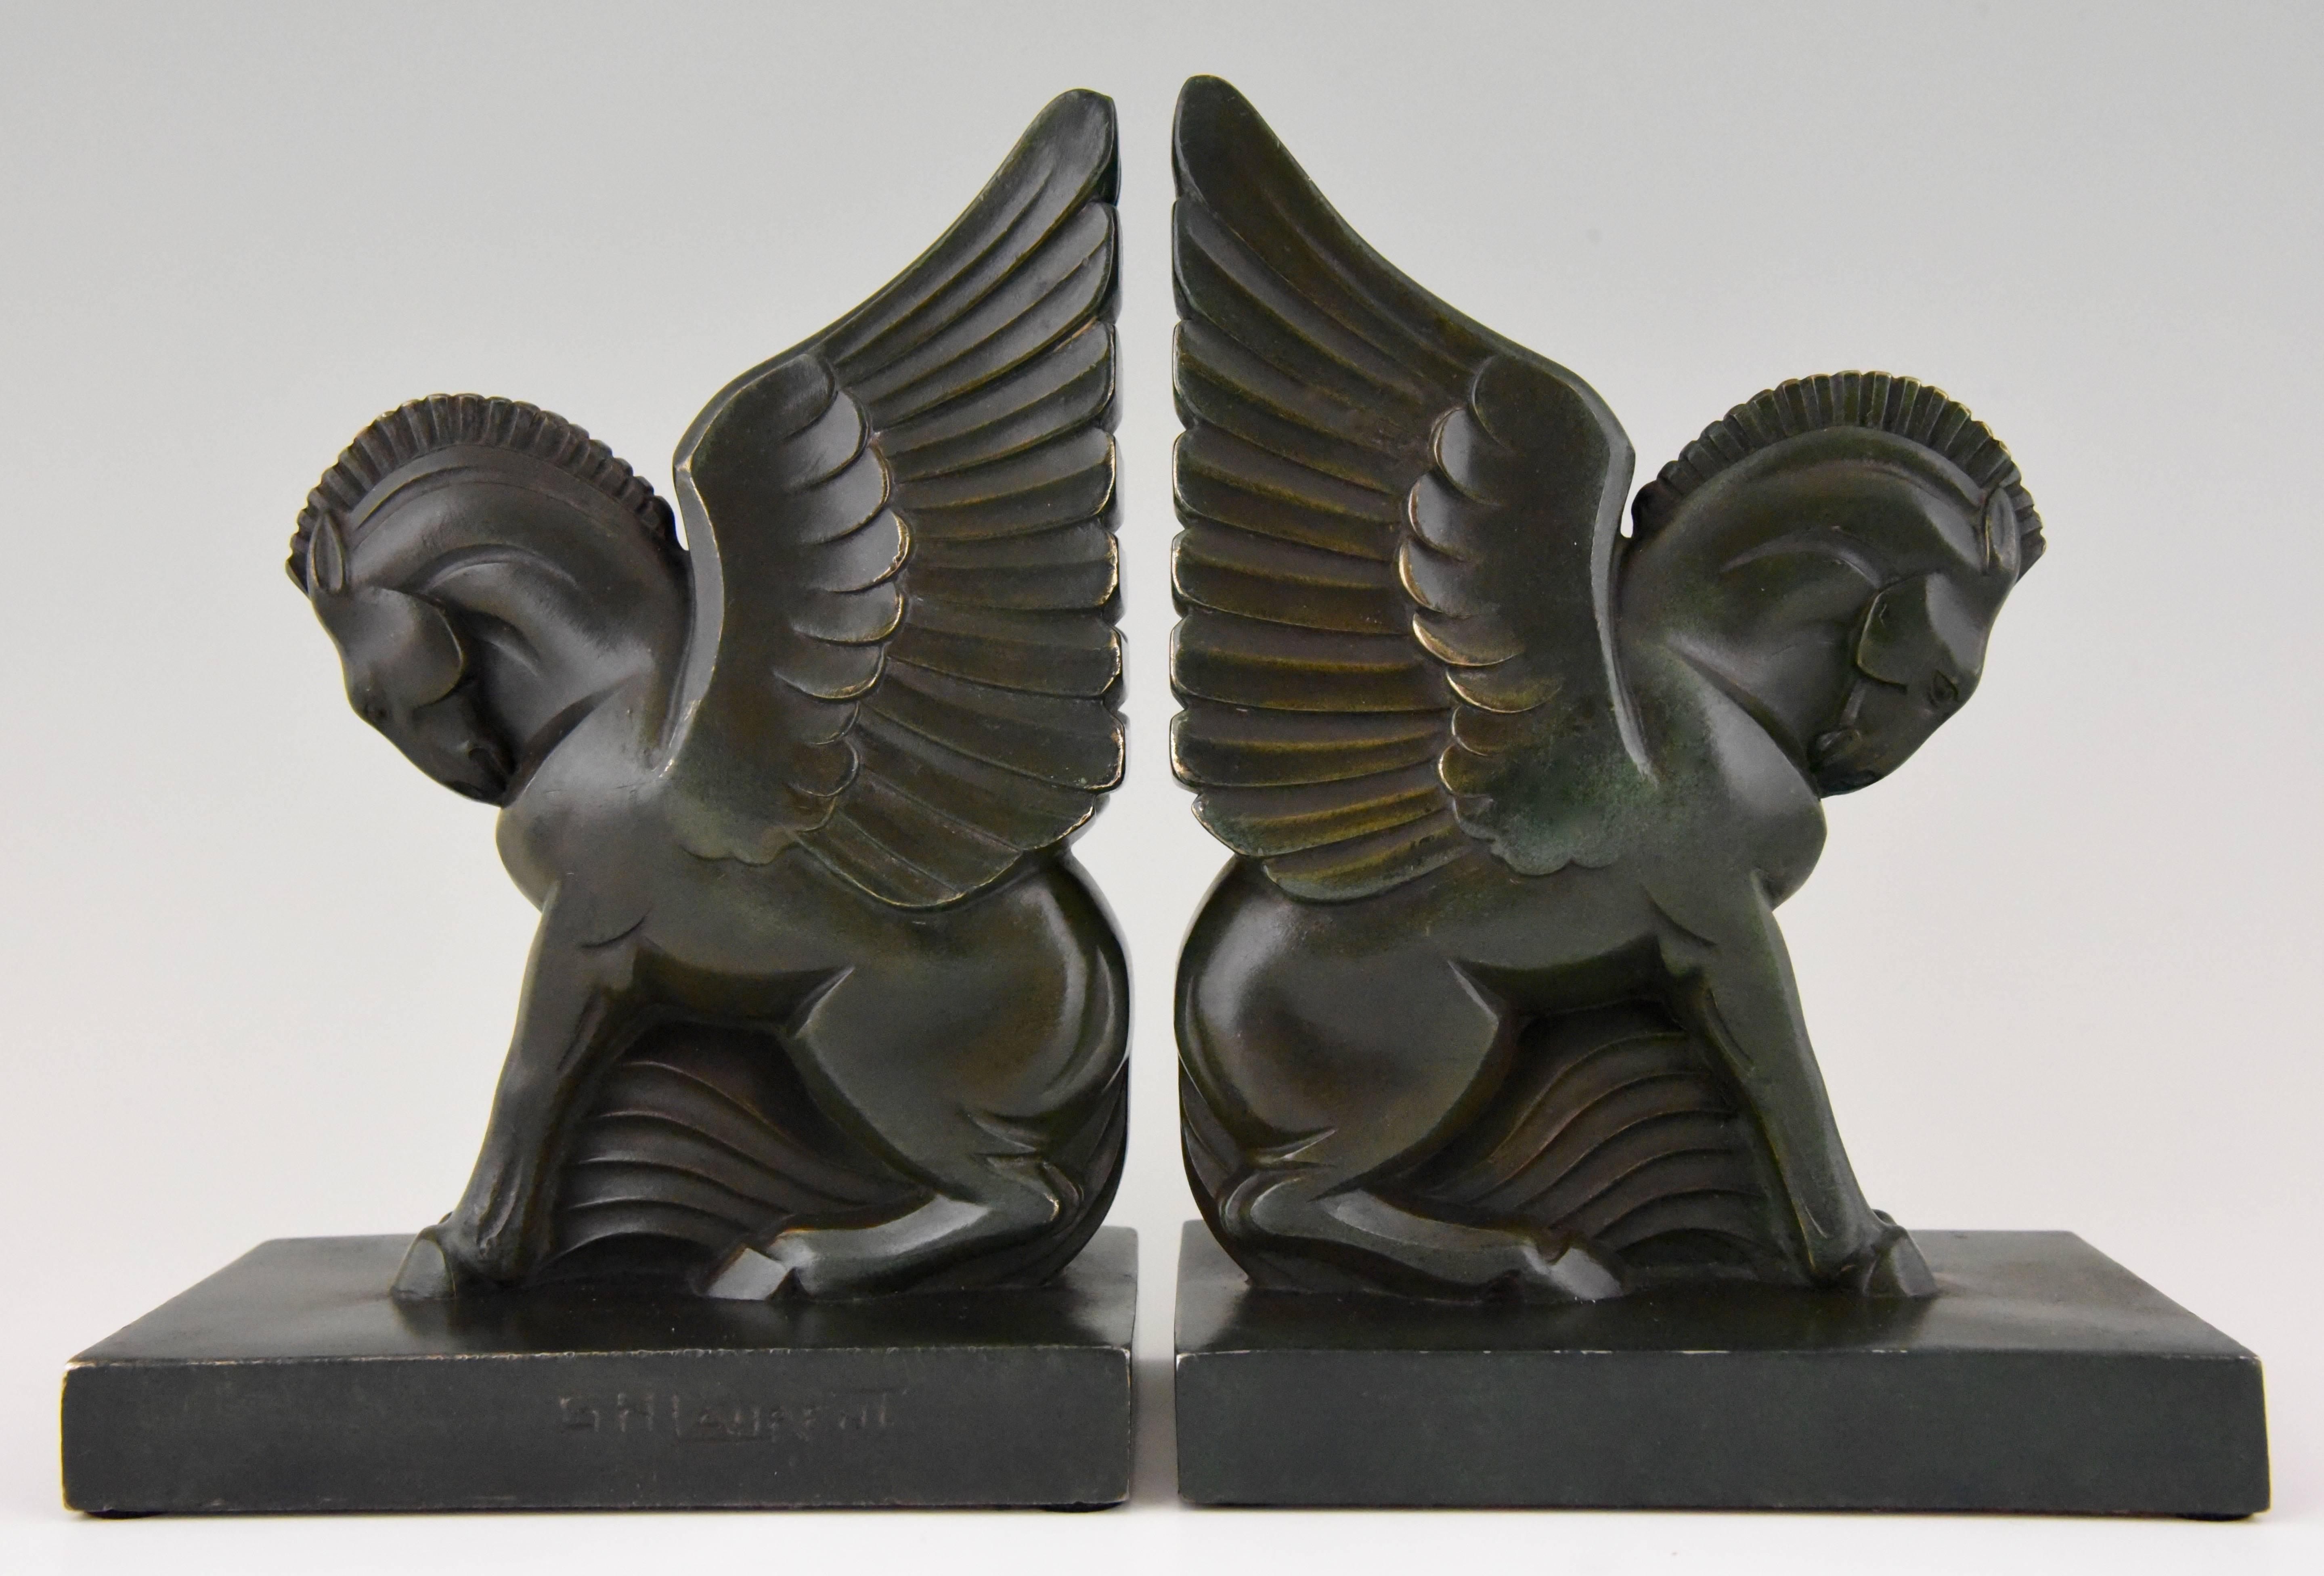 Pegasus, stylish pair of winged horse bookends by George H. Laurent France, circa 1930
Artist/ maker: Georges H. Laurent
Signature/ marks: G.H. Laurent
Style: Art Deco
Date: 1930
Material: Patinated Art metal. 
Origin: France
Size: 
H 18 cm